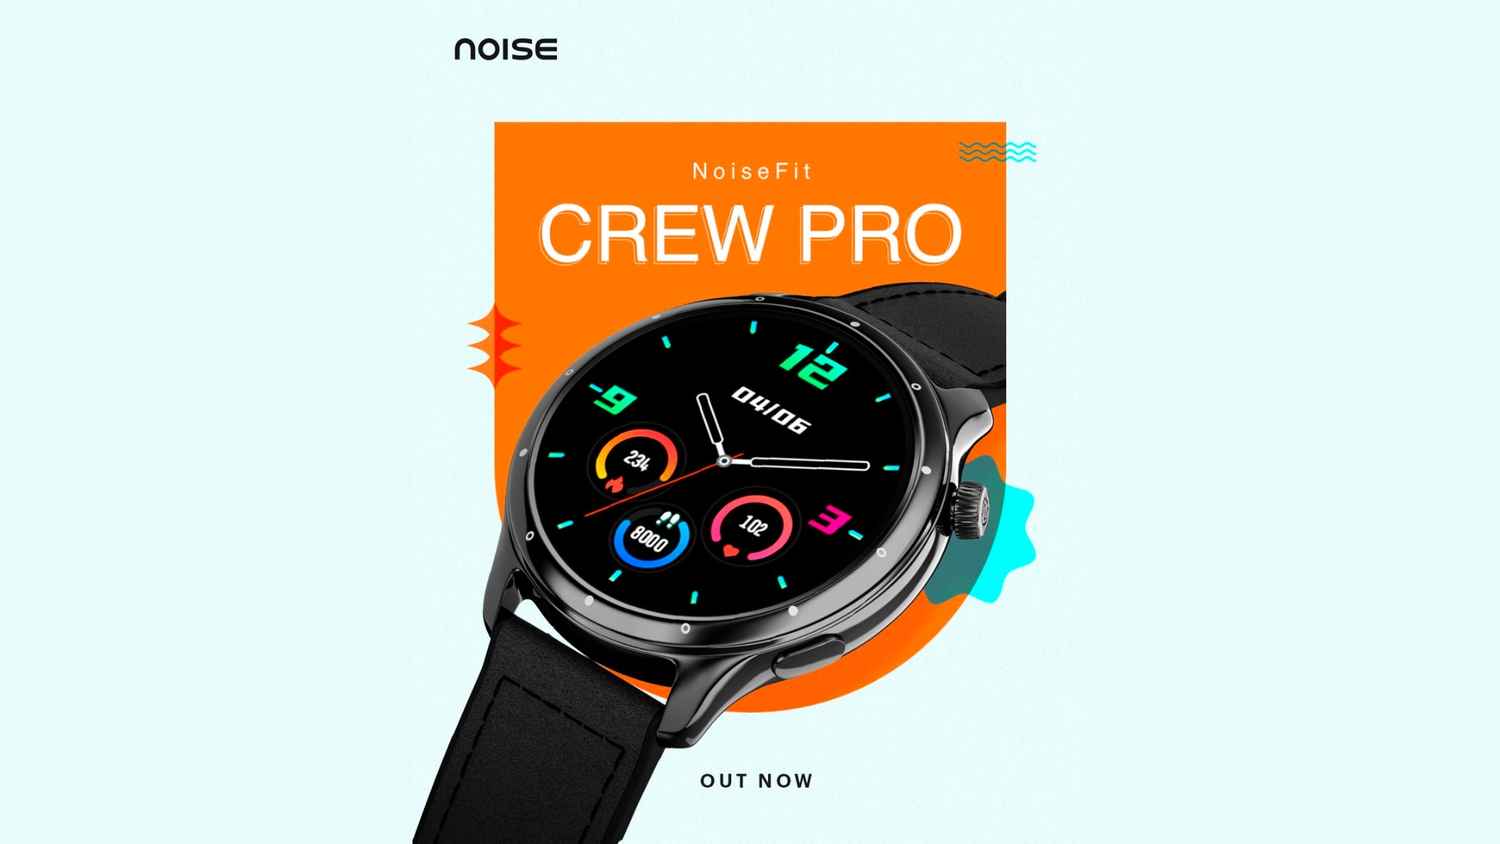 NoiseFit Crew Pro smartwatch launched at ₹2199: Is it specced to heat up the competition?